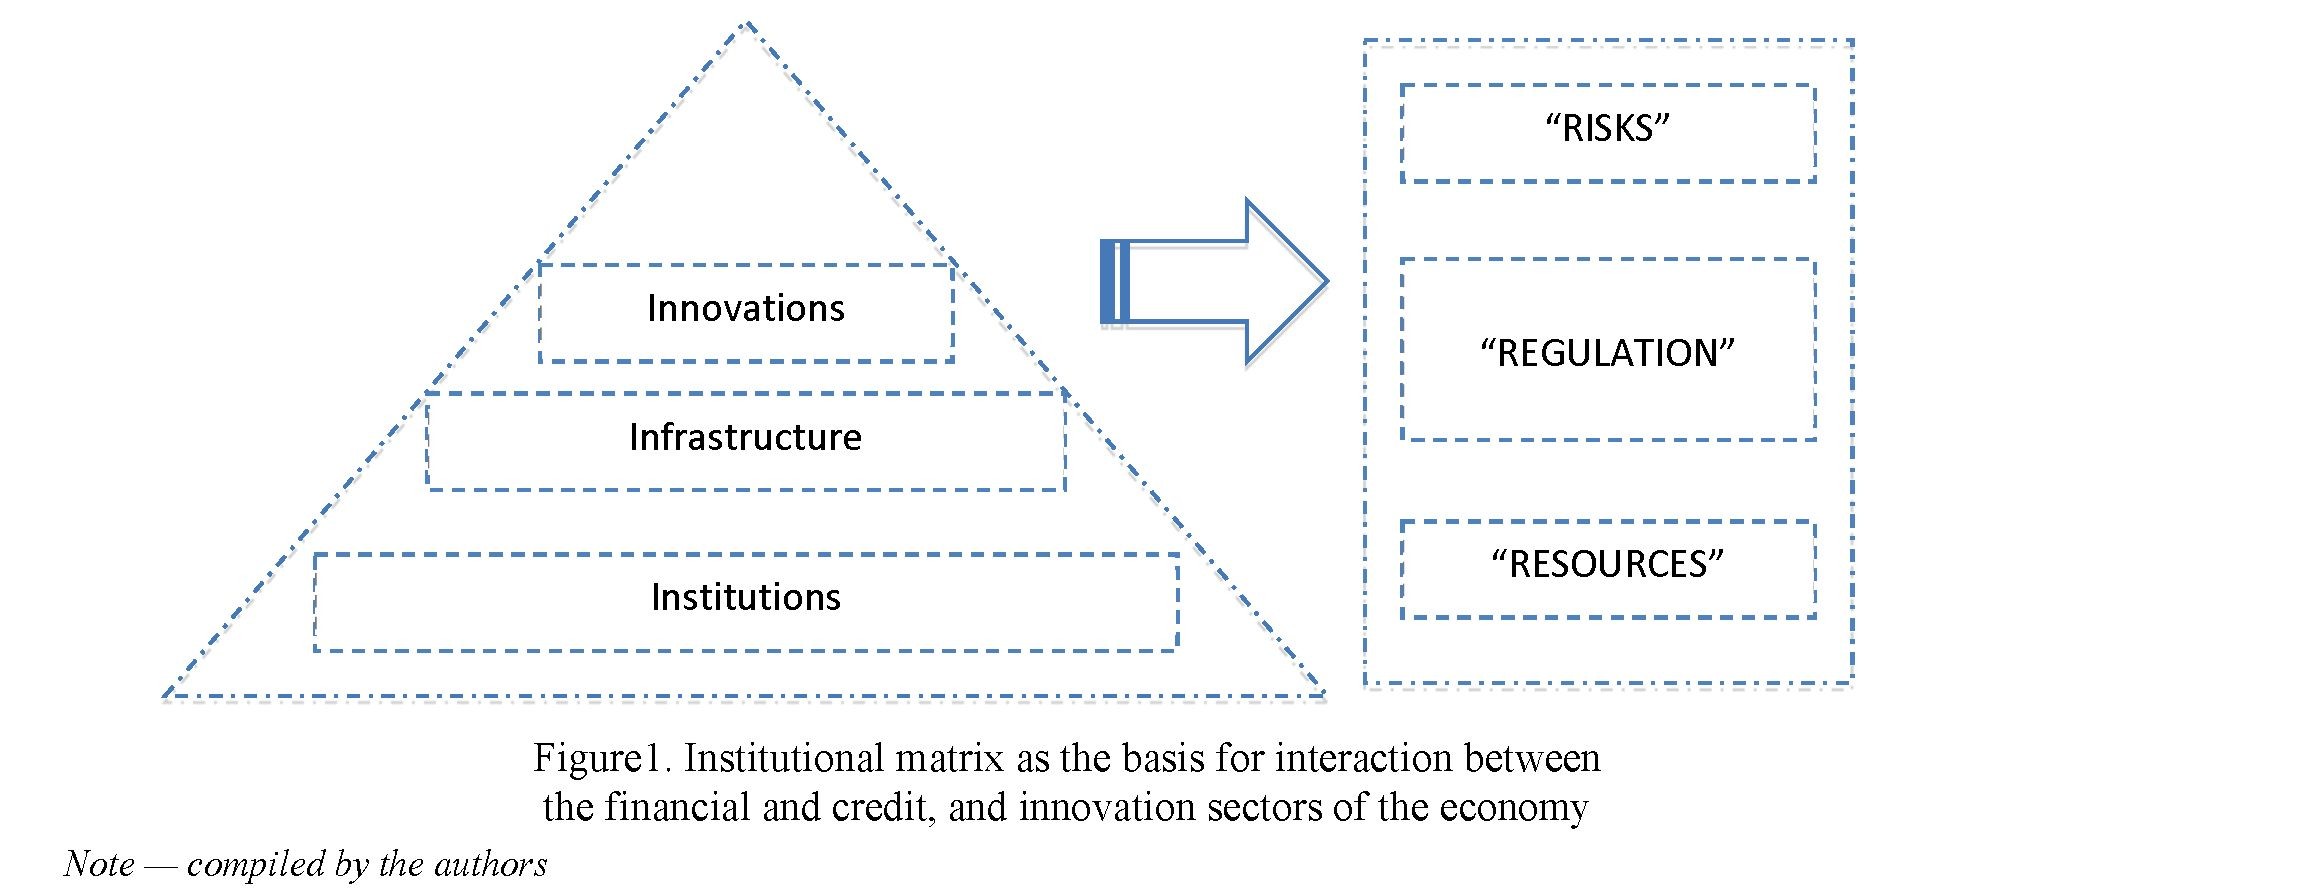 Institutional aspects in regulating interaction between financial and innovation sectors